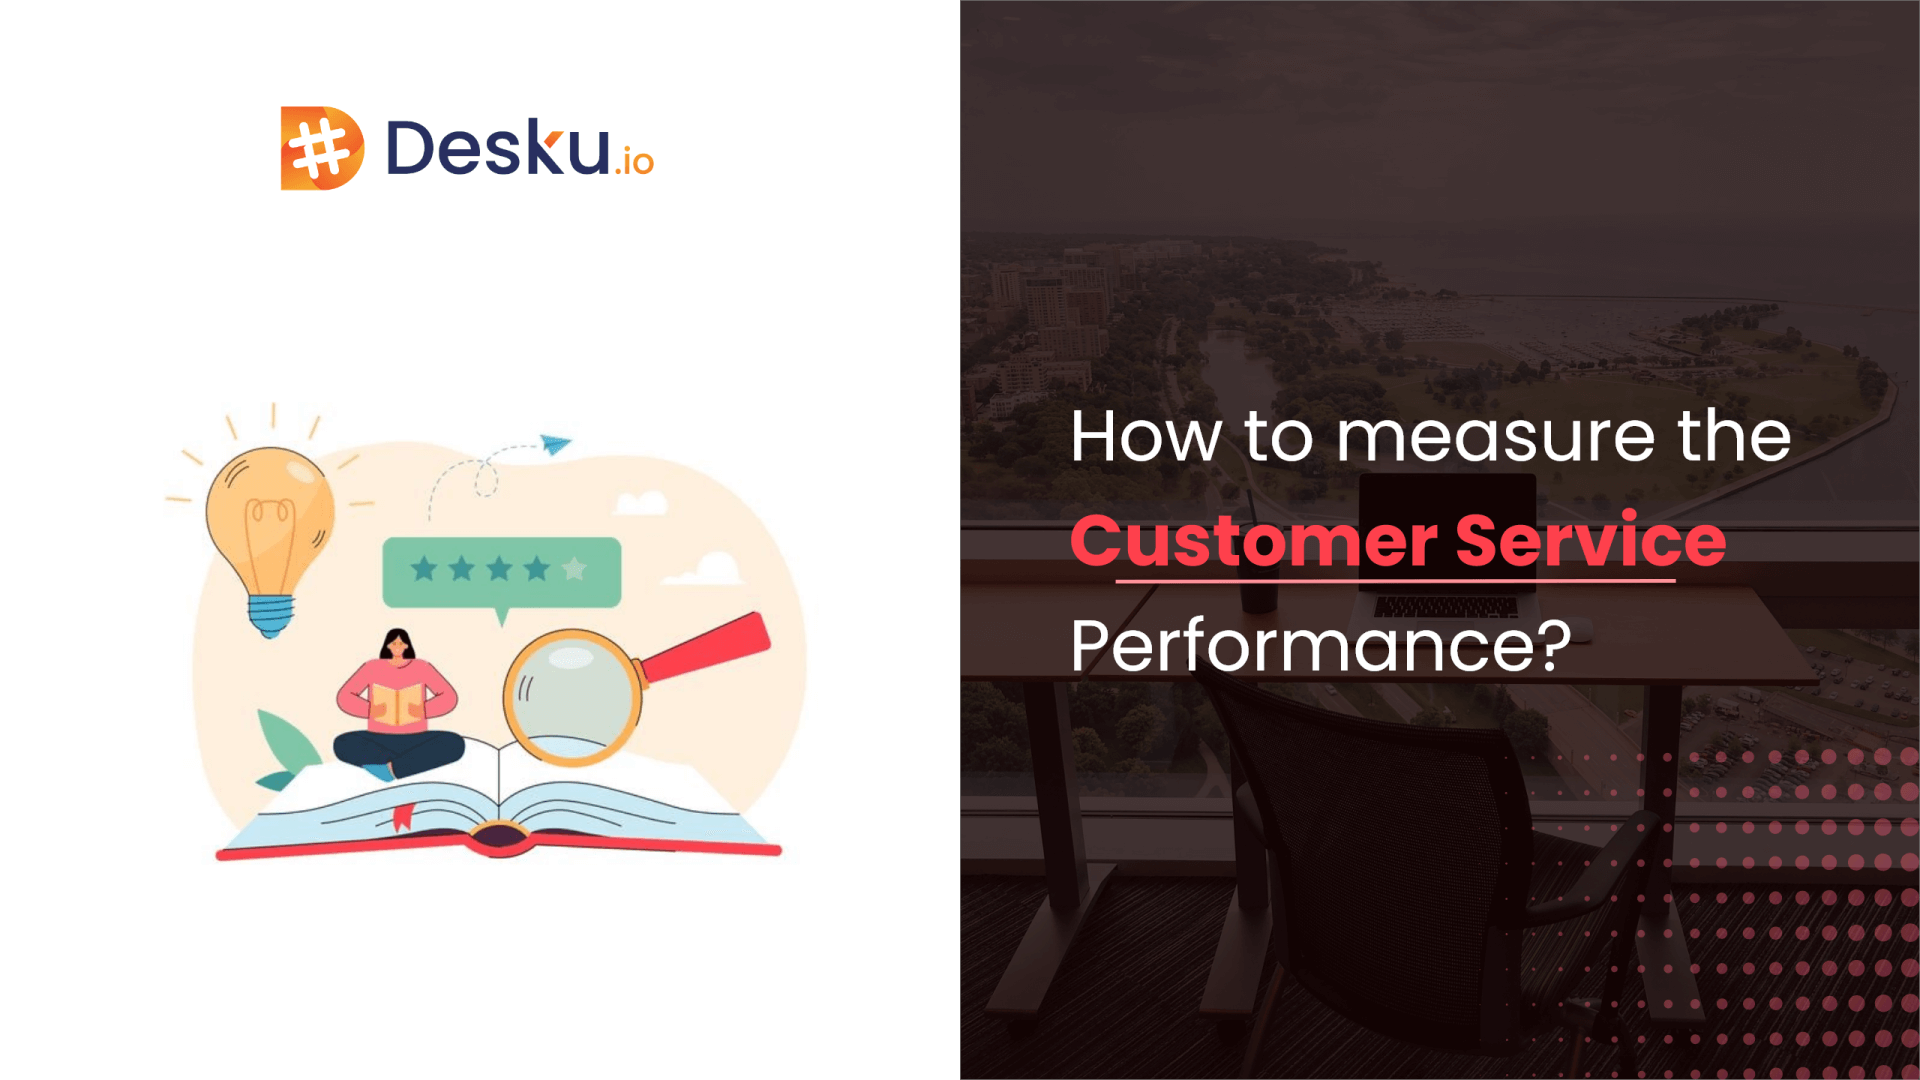 How to measure the Customer Service Performance?